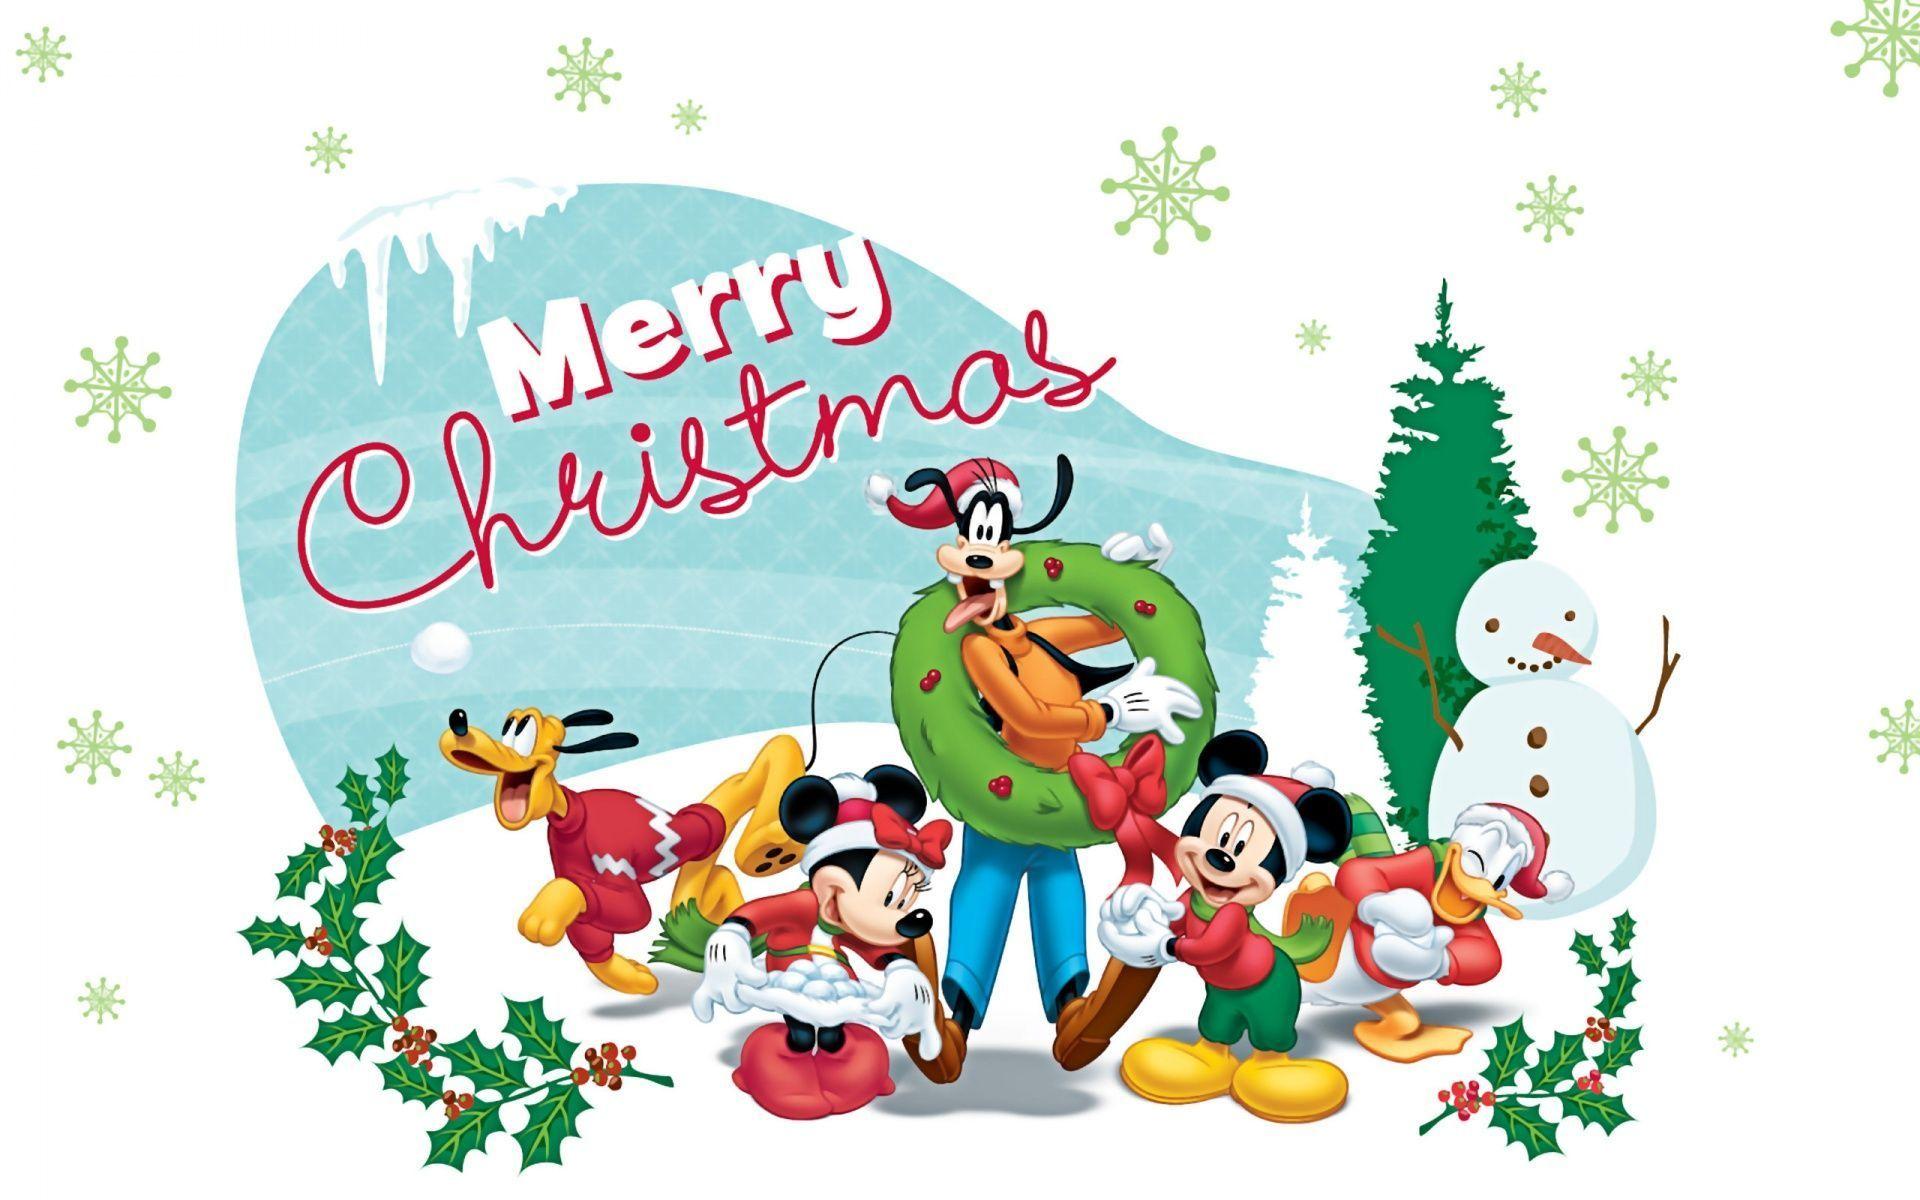 Disney wallpapers at Christmas time all in HD from Donald to mickey